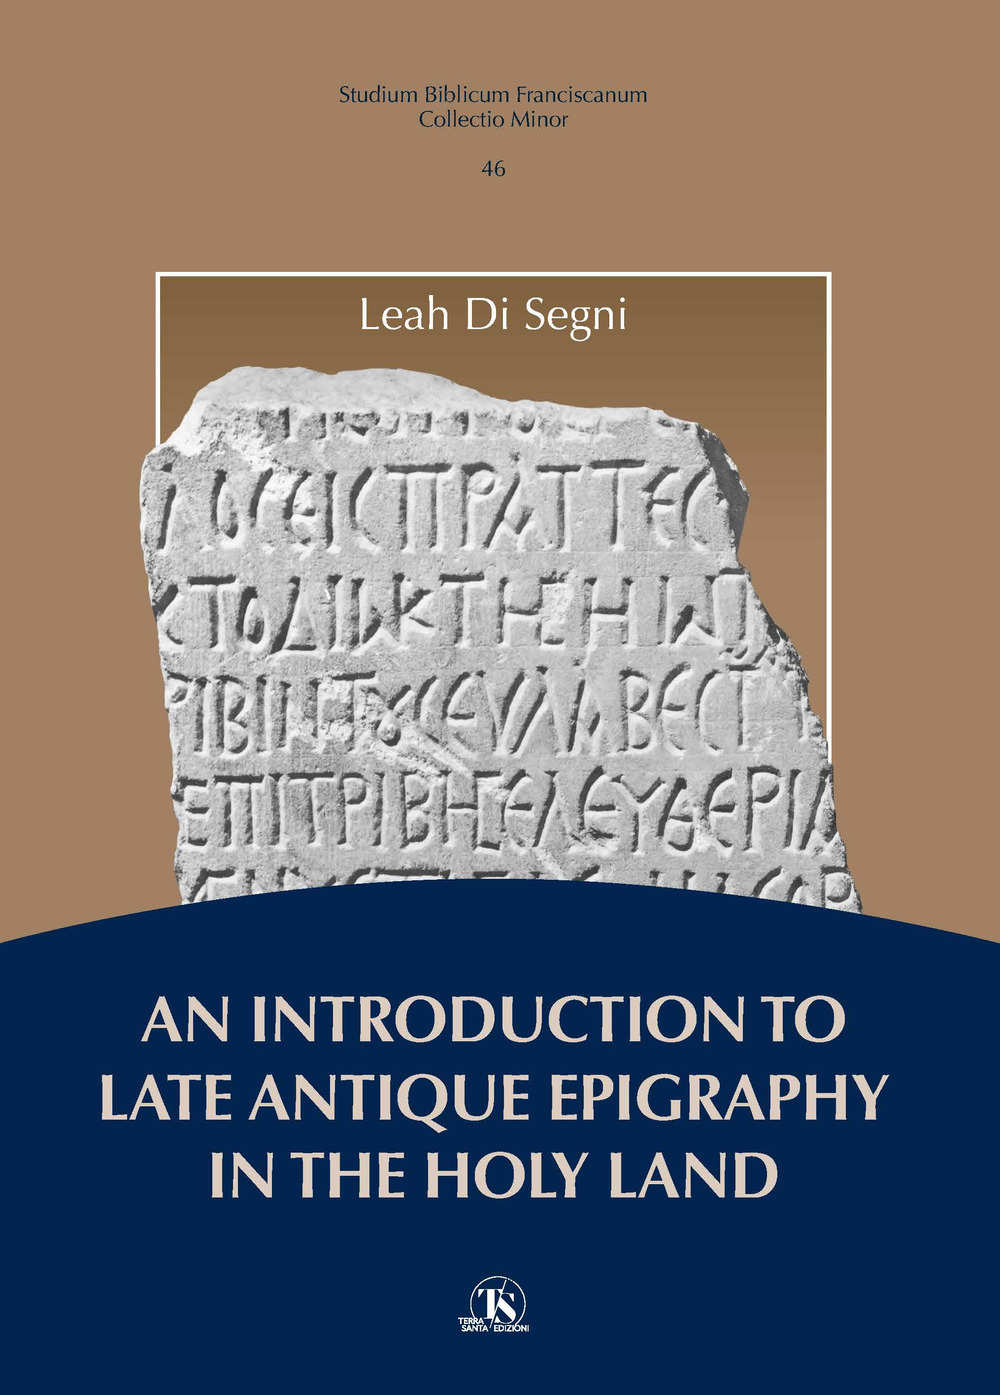 An introduction to late antique epigraphy in the Holy Land